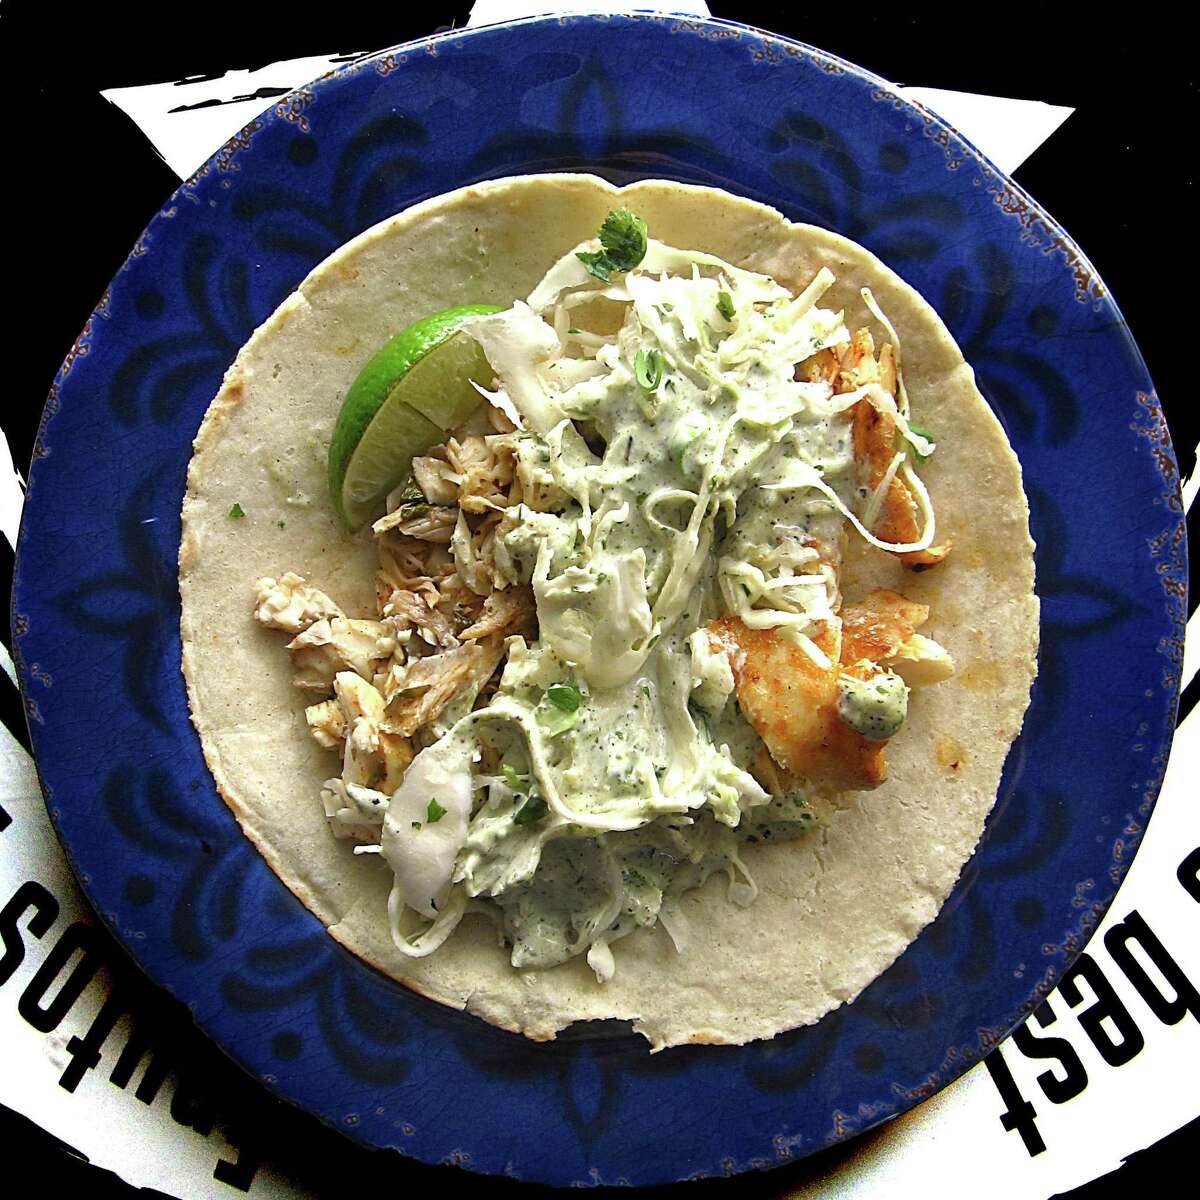 Grilled fish taco with cilantro-lime cabbage slaw and poblano cream sauce on a handmade corn tortilla from Beto's Alt-Mex.